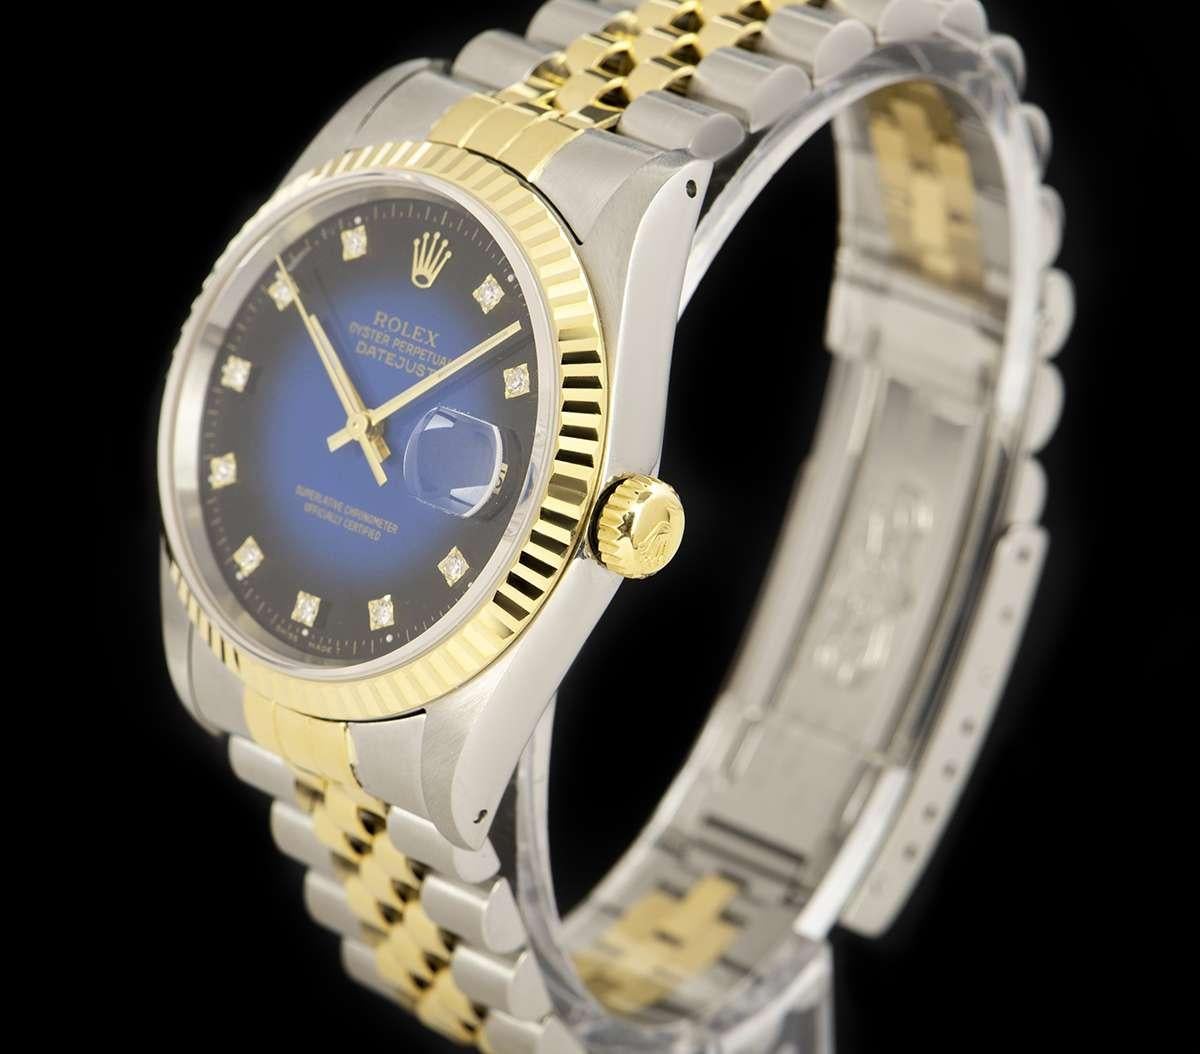 A Stainless Steel & 18k Yellow Gold Oyster Perpetual Datejust Gents Wristwatch, blue vignette dial with 10 applied round brilliant cut diamond hour markers, date at 3 0'clock, a fixed 18k yellow gold fluted bezel, a stainless steel and 18k yellow